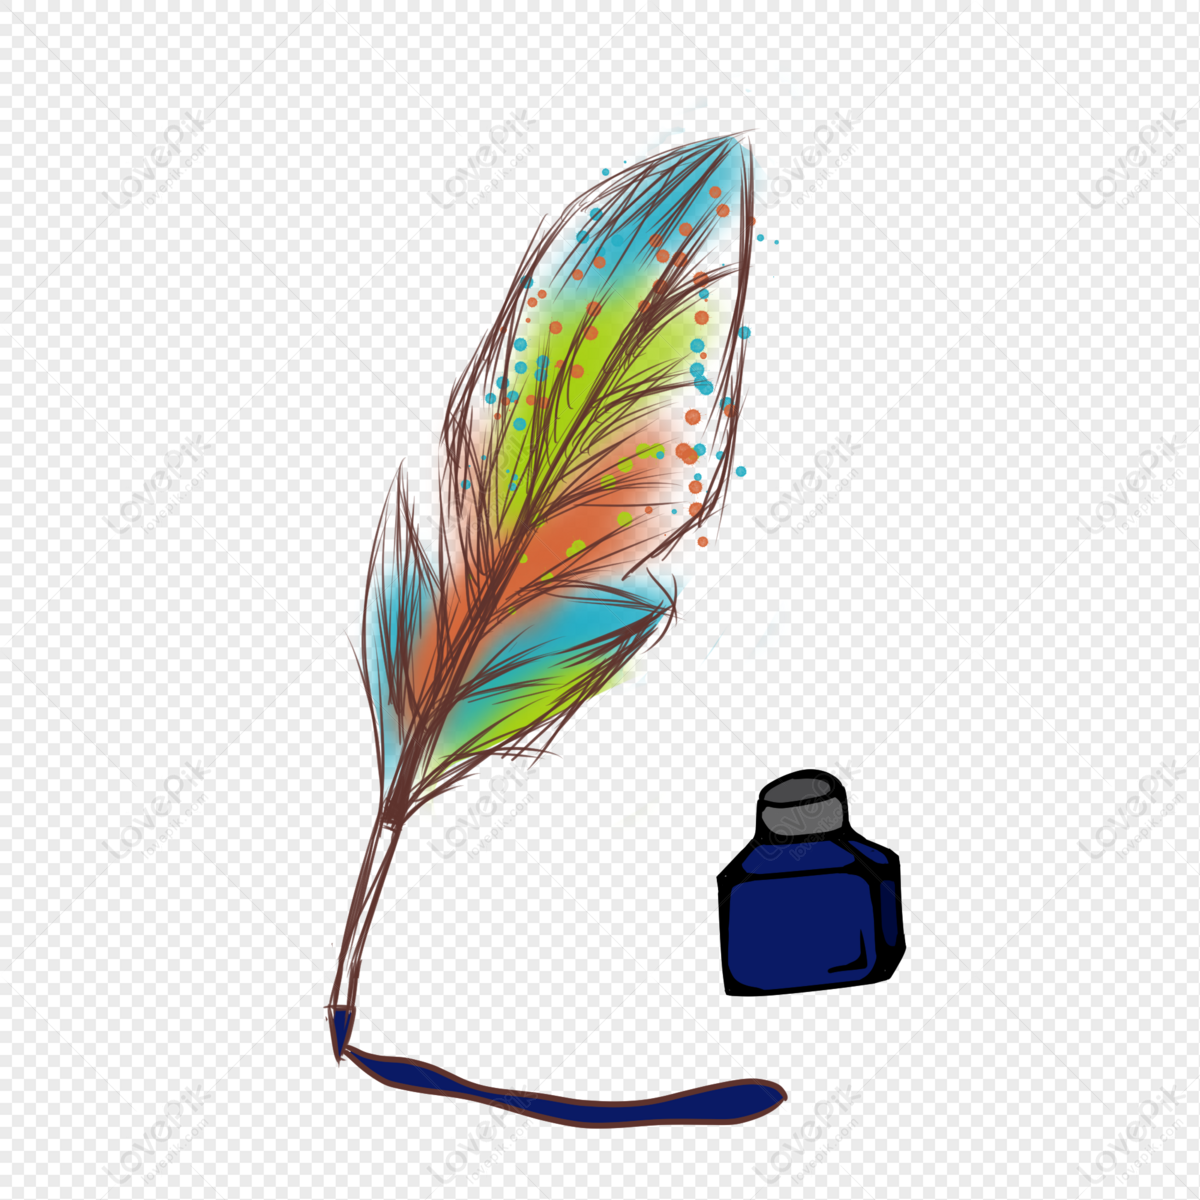 Feather Pen Hd Transparent, Colored Feather Feather Pen, Feather Clipart,  Colored Feathers, Feather Pens PNG Image For Free Download